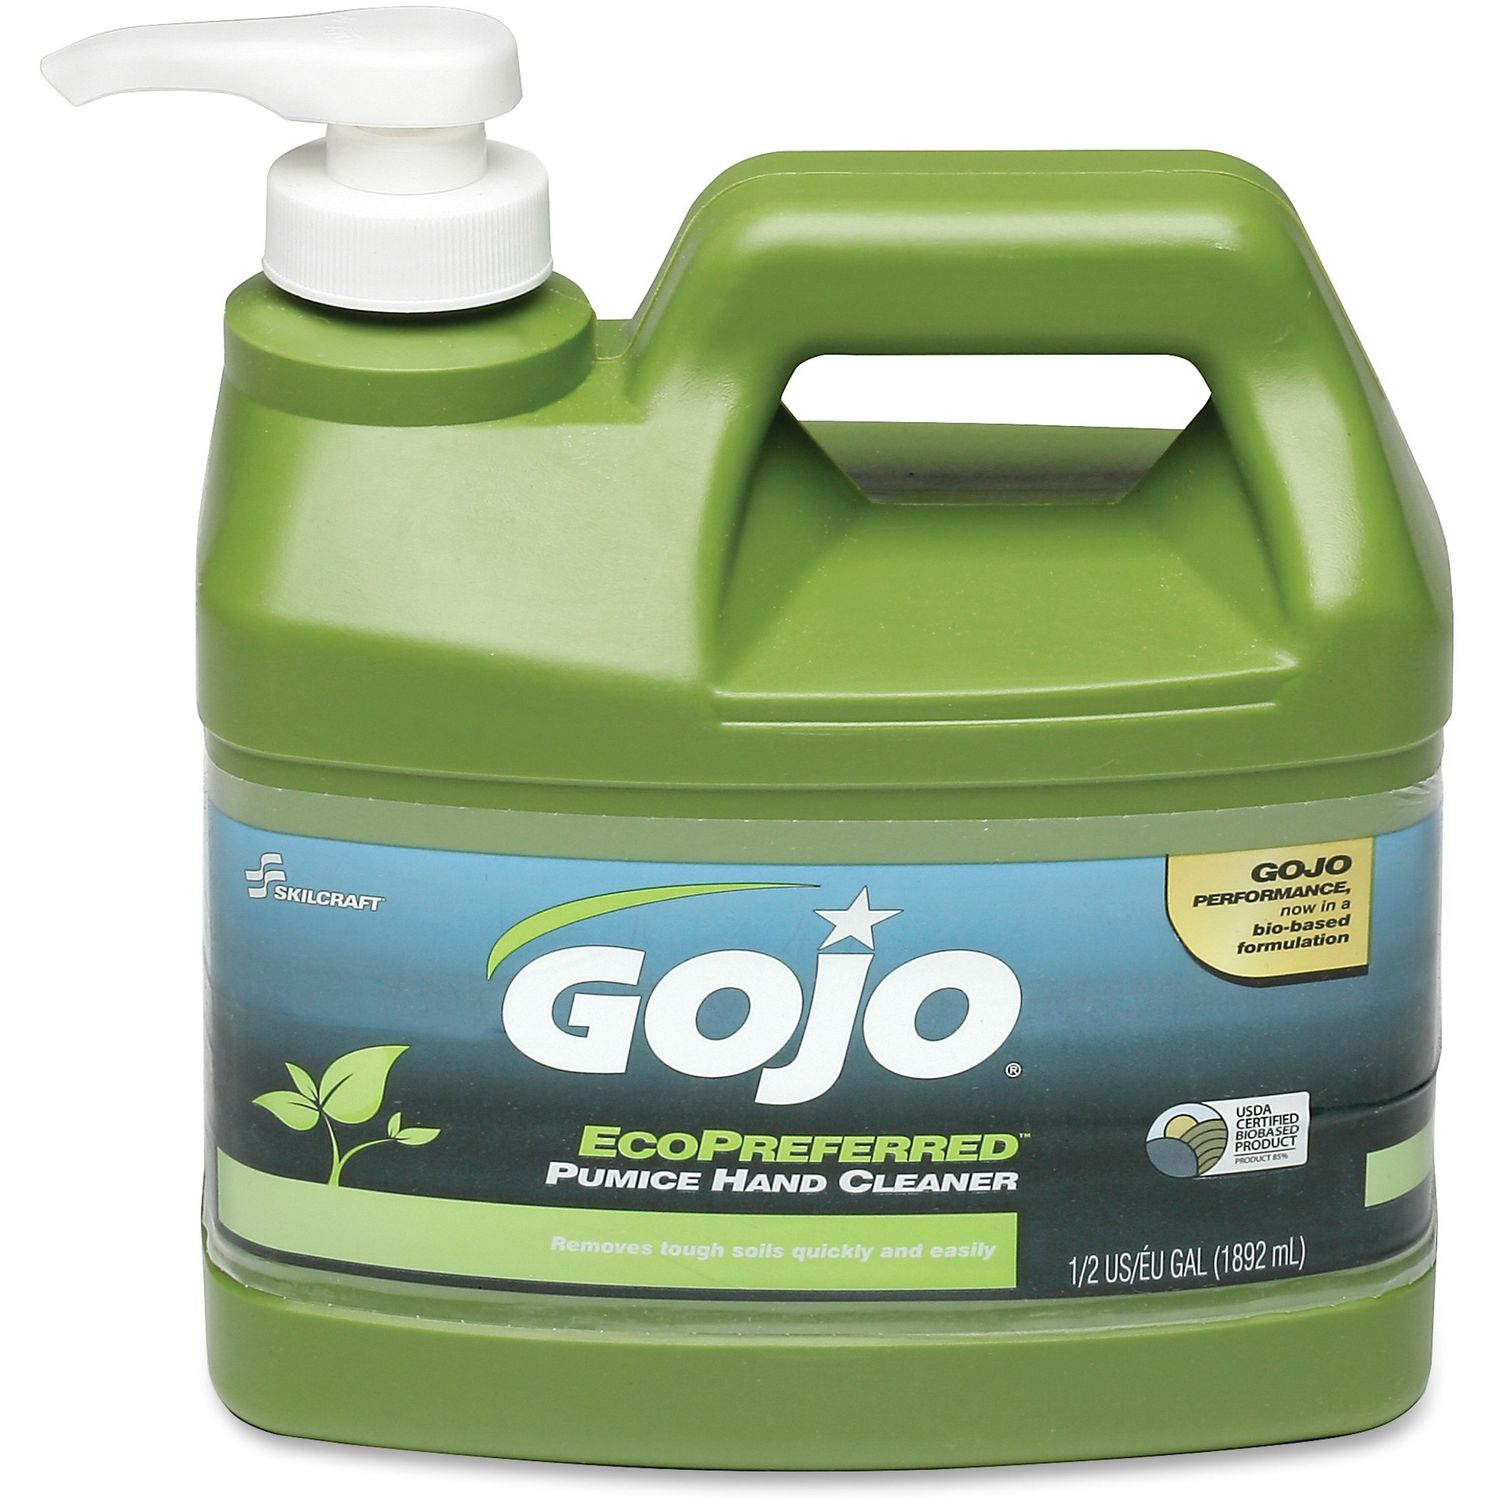 GOJO EcoPreferred Pumice Hand Cleaner Lime Scent, 64 fl oz (1892.7 mL), Dirt Remover, Grease Remover, Soil Remover, Hand, Gray, Heavy Duty, Bio-based, 6 / Box